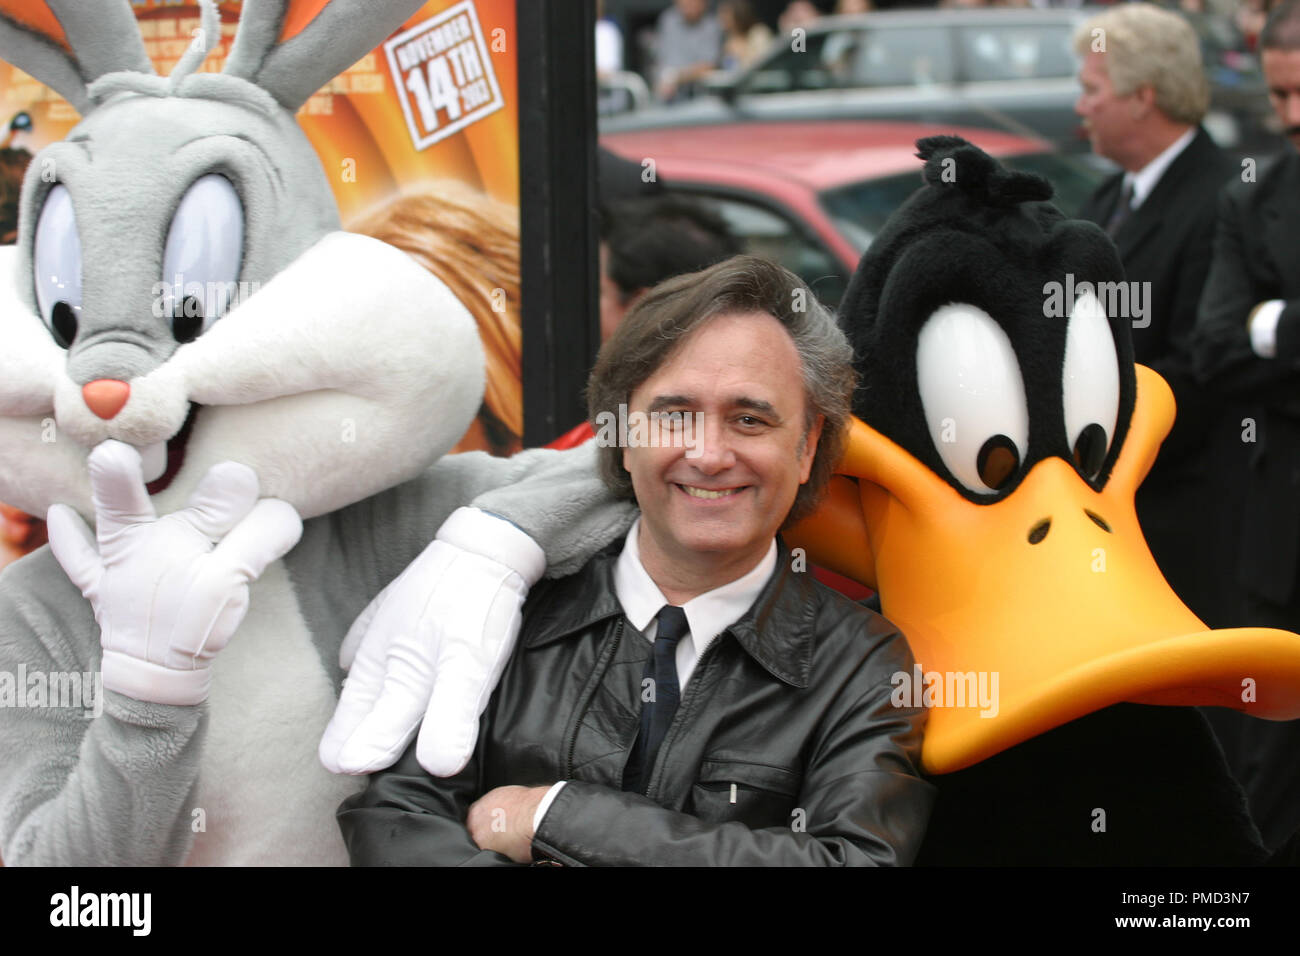 'Looney Tunes: Back in Action' Premiere 11-9-2003 Dir. Joe Dante with Bugs Bunny and Daffy Duck Photo by Joseph Martinez - All Rights Reserved  File Reference # 21596 0022PLX  For Editorial Use Only -  All Rights Reserved Stock Photo